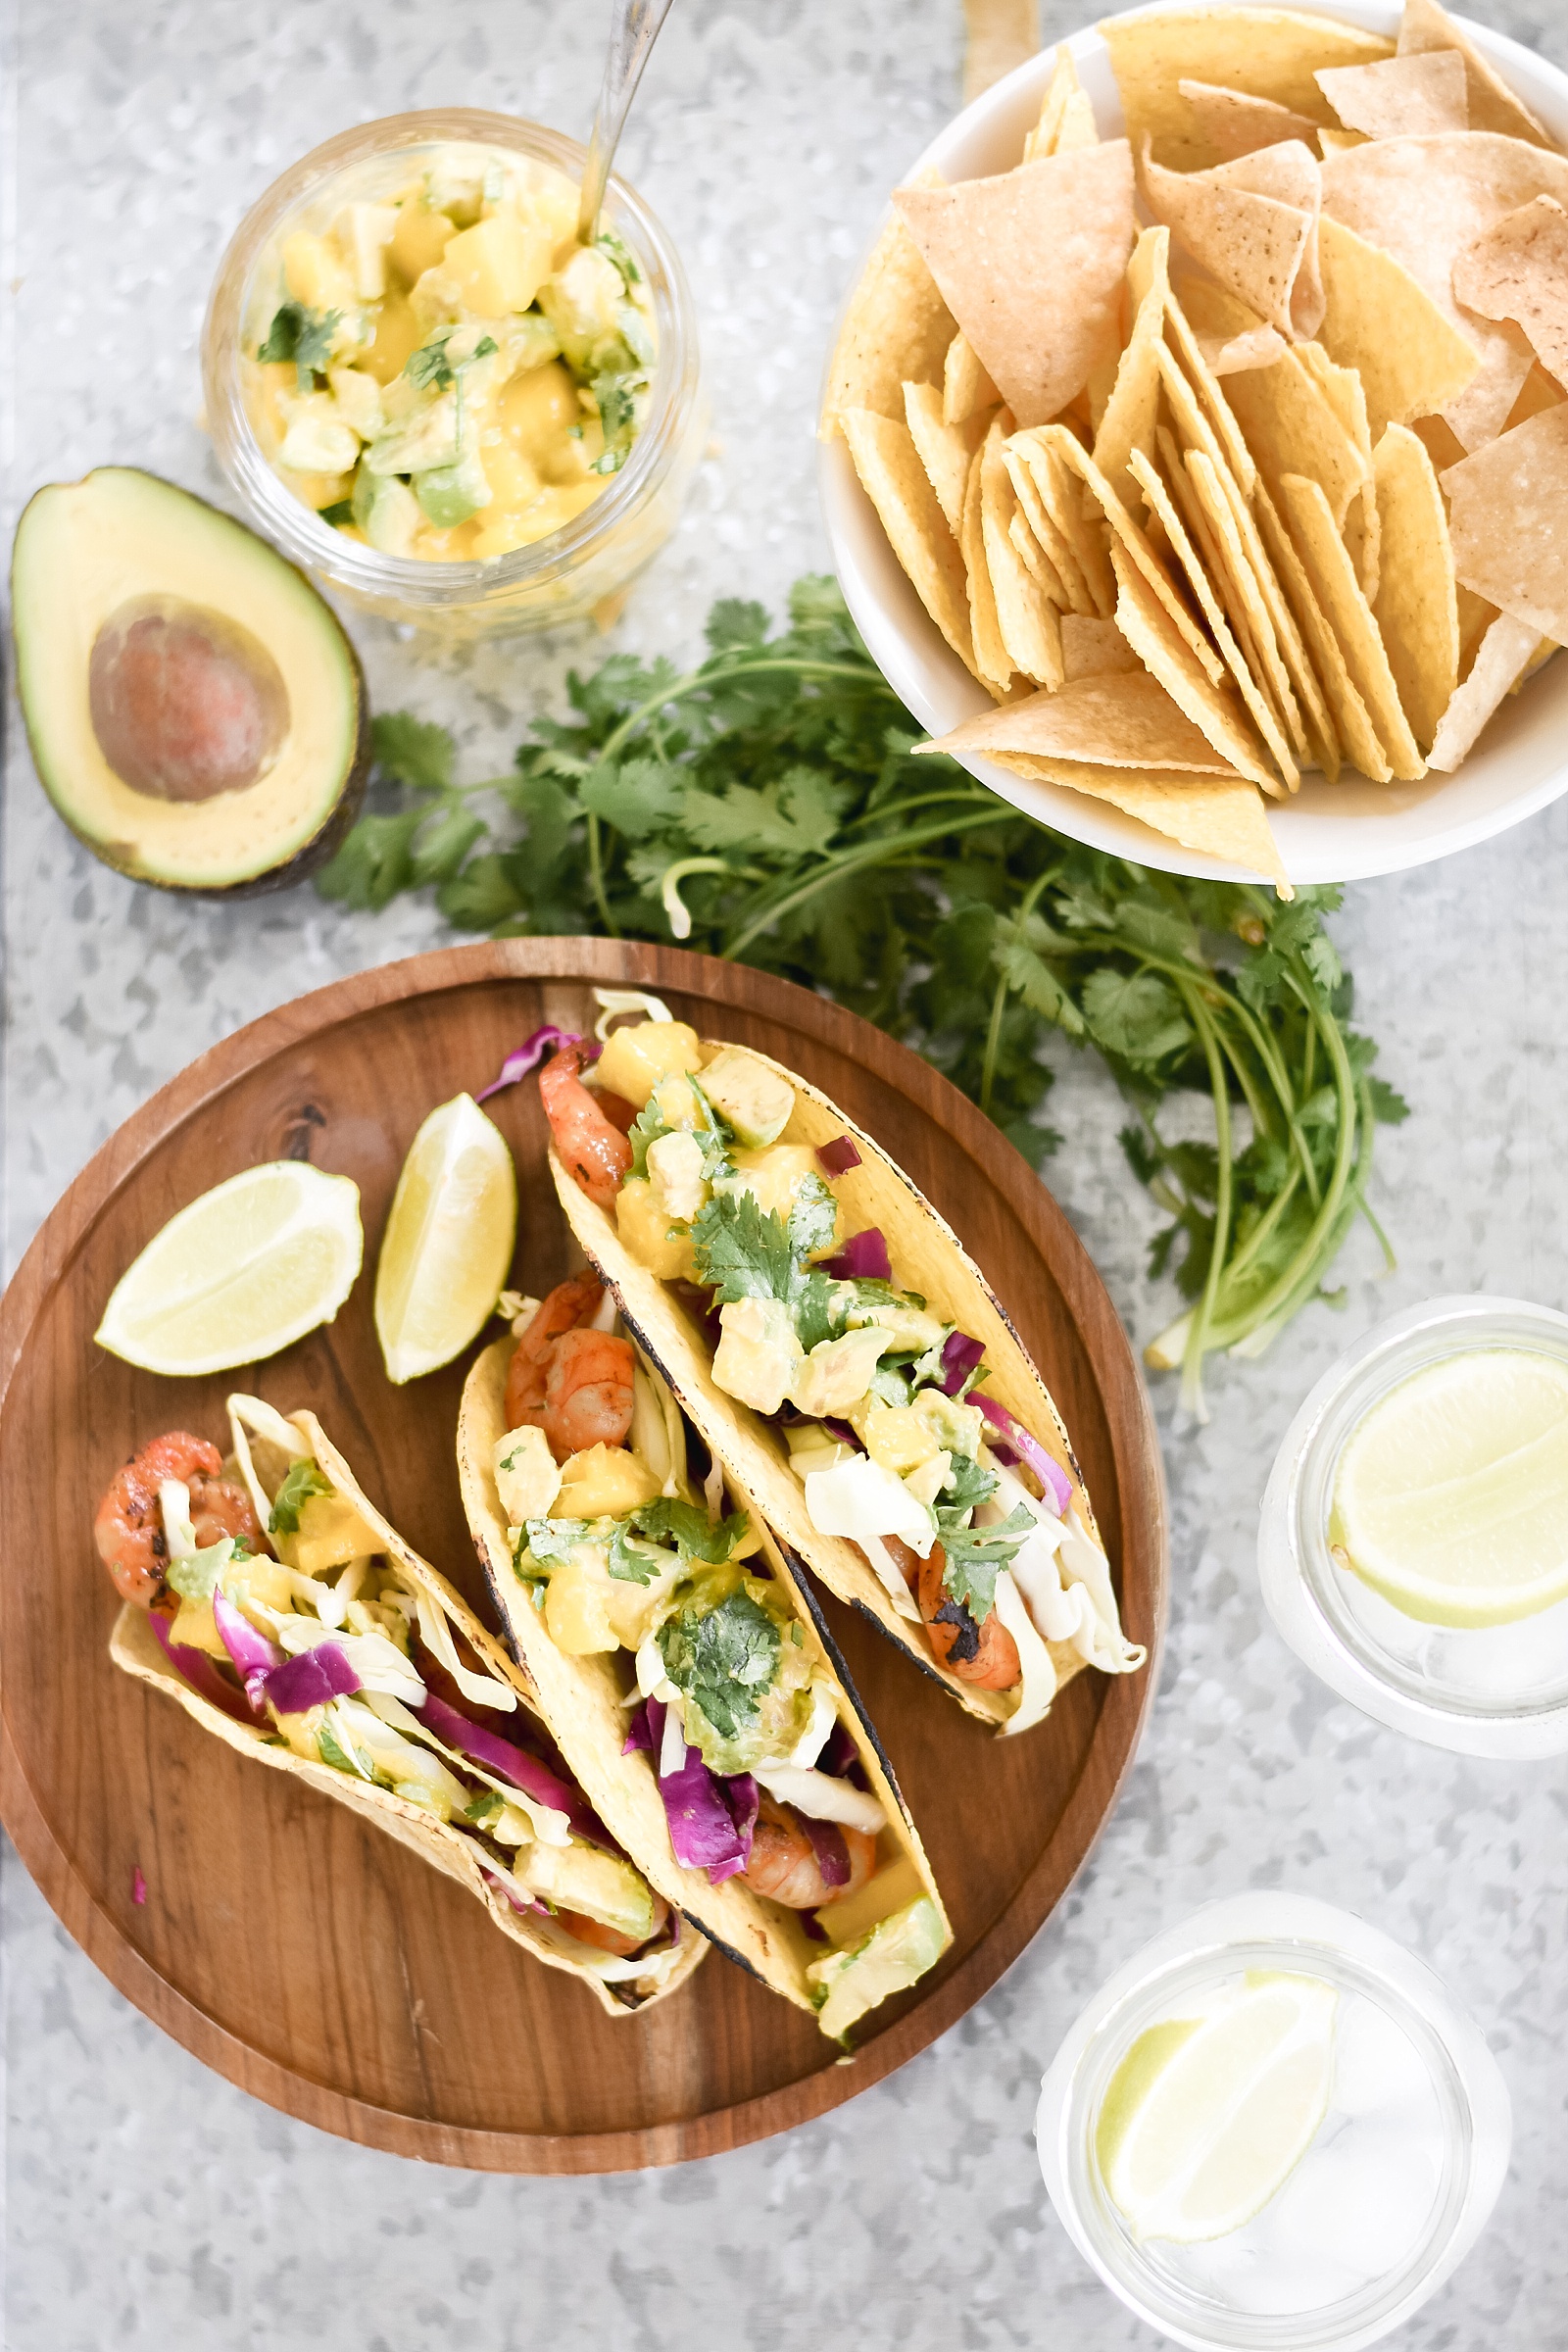 Grilled Spicy Shrimp Tacos with Avocado Mango Salsa and Chipotle Mayo